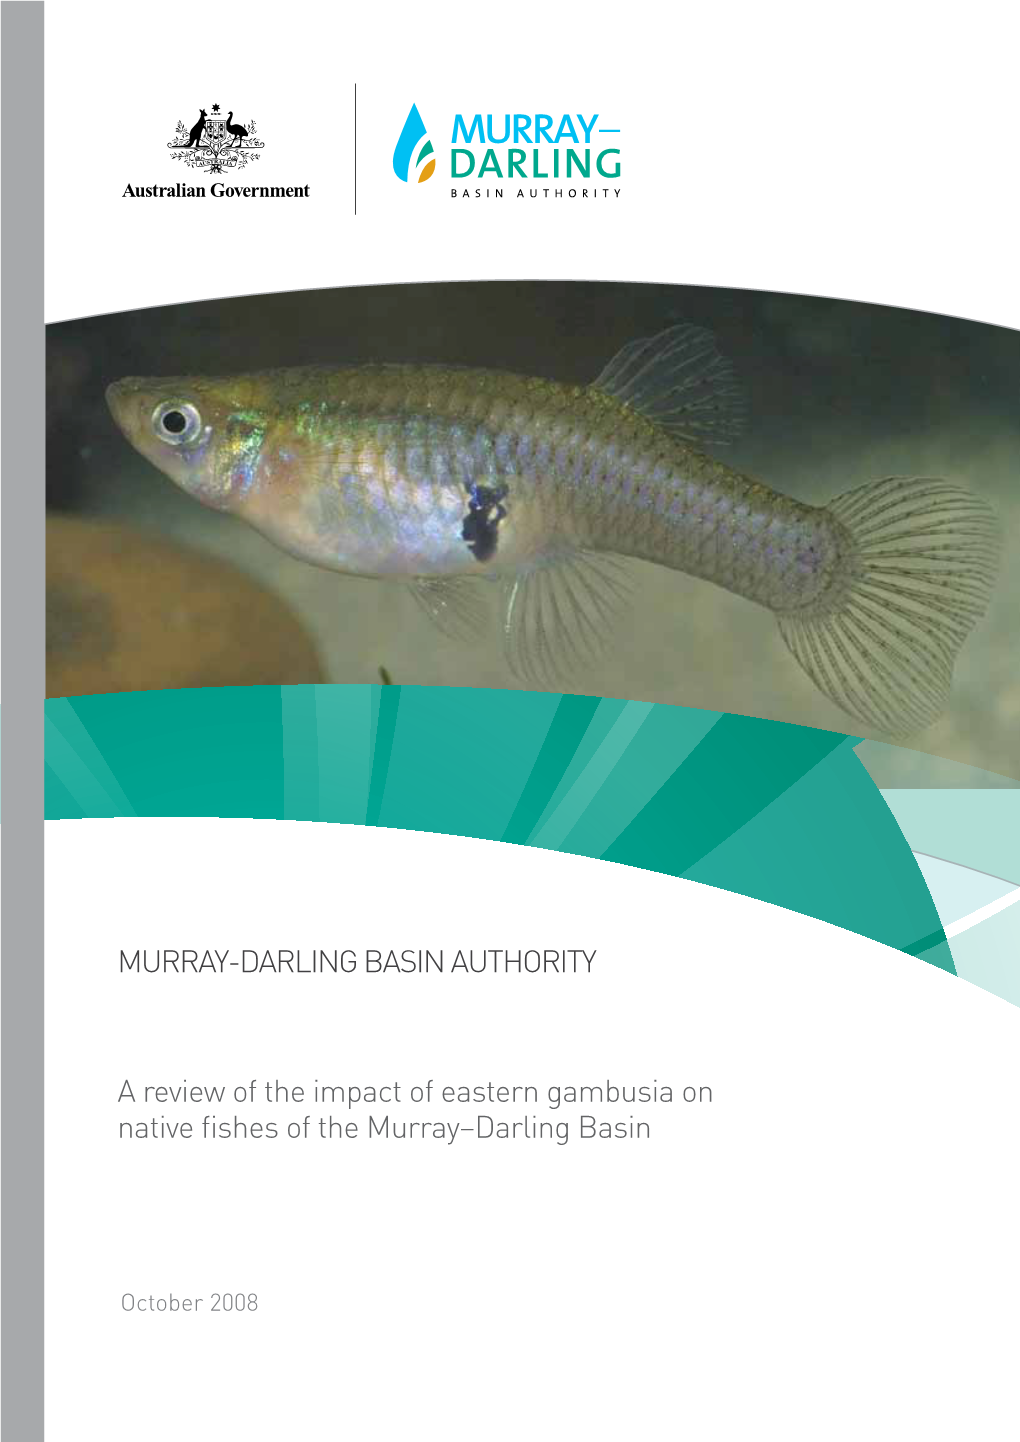 MDBA a Review of the Impact of Eastern Gambusia on Native Fishes